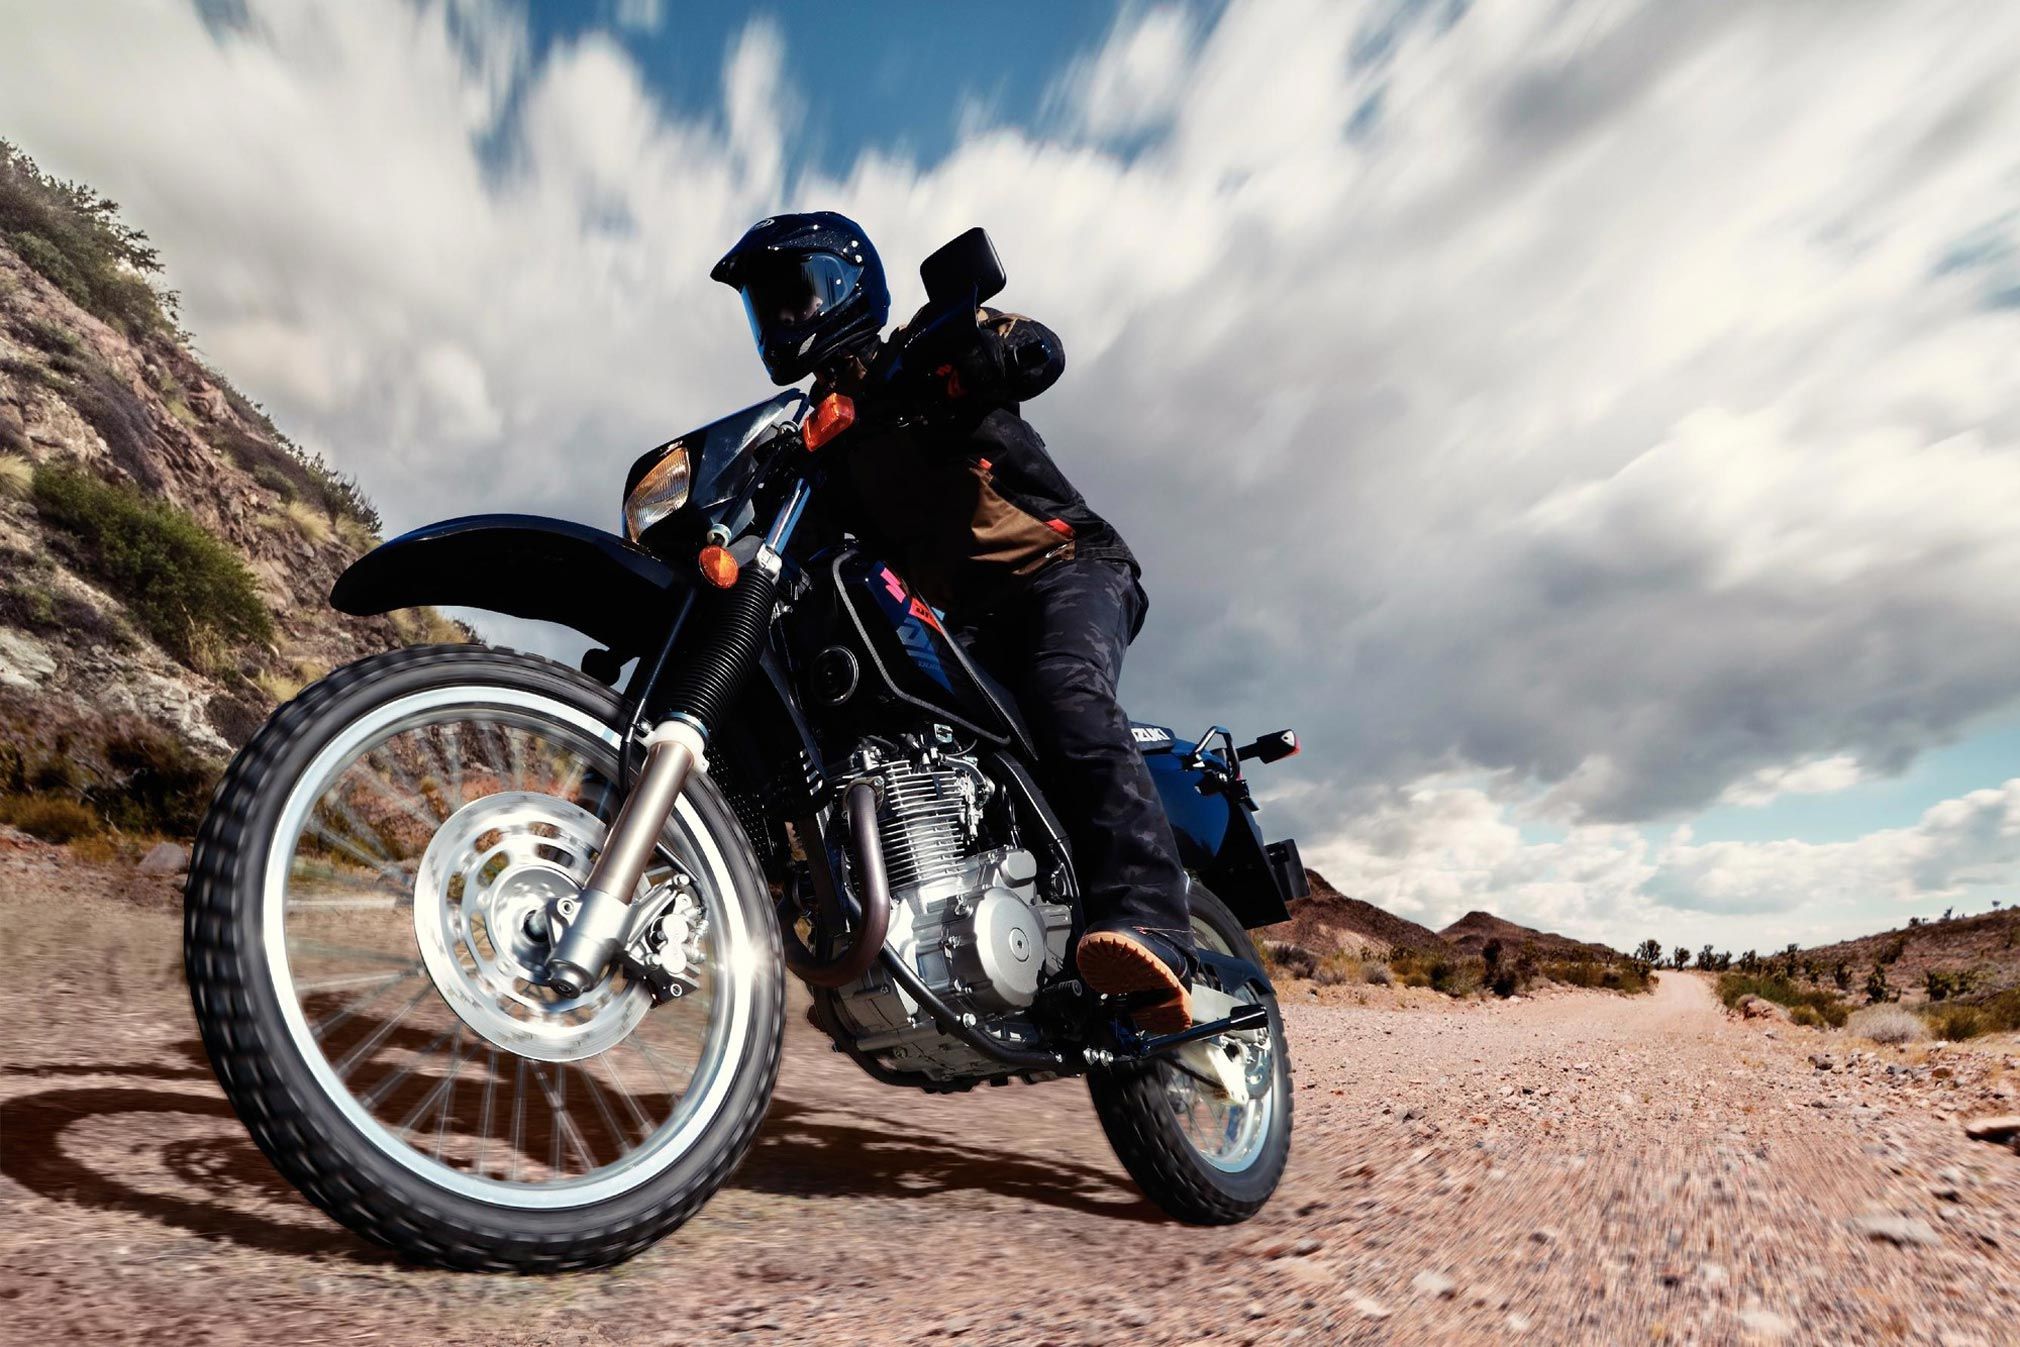 on a dirt road with a Suzuki DR650S